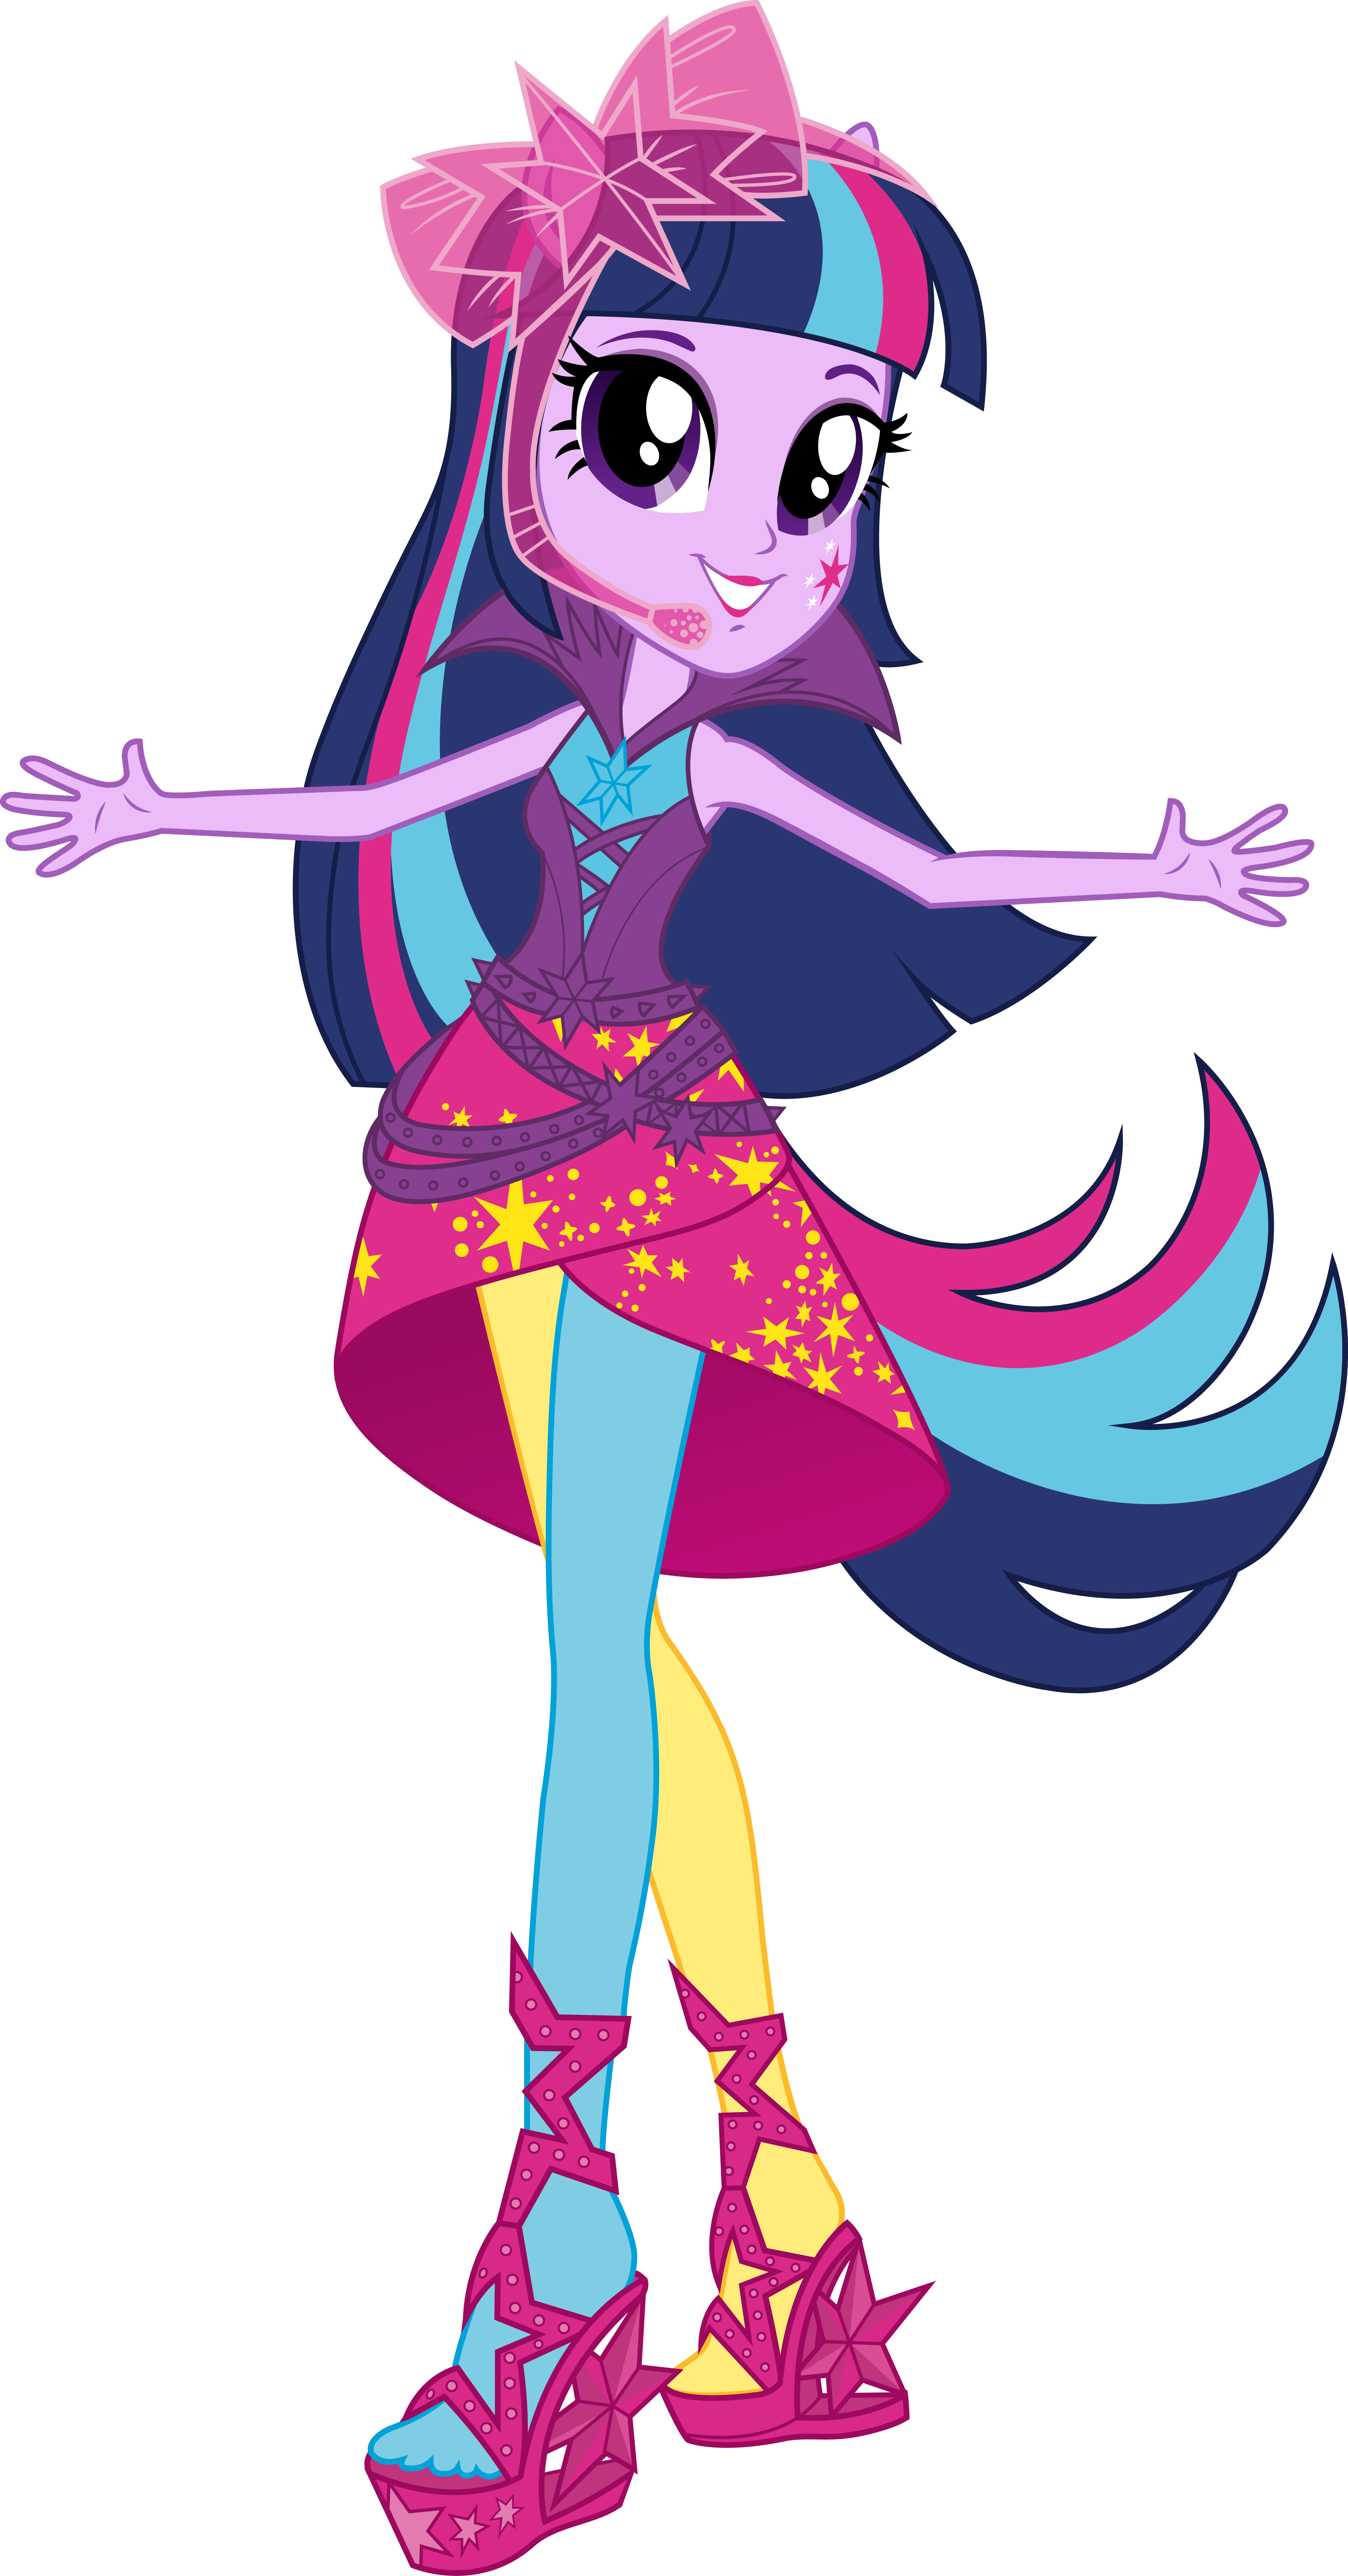  My  Little  Pony  Equestria  Girls  Wallpapers High Quality 